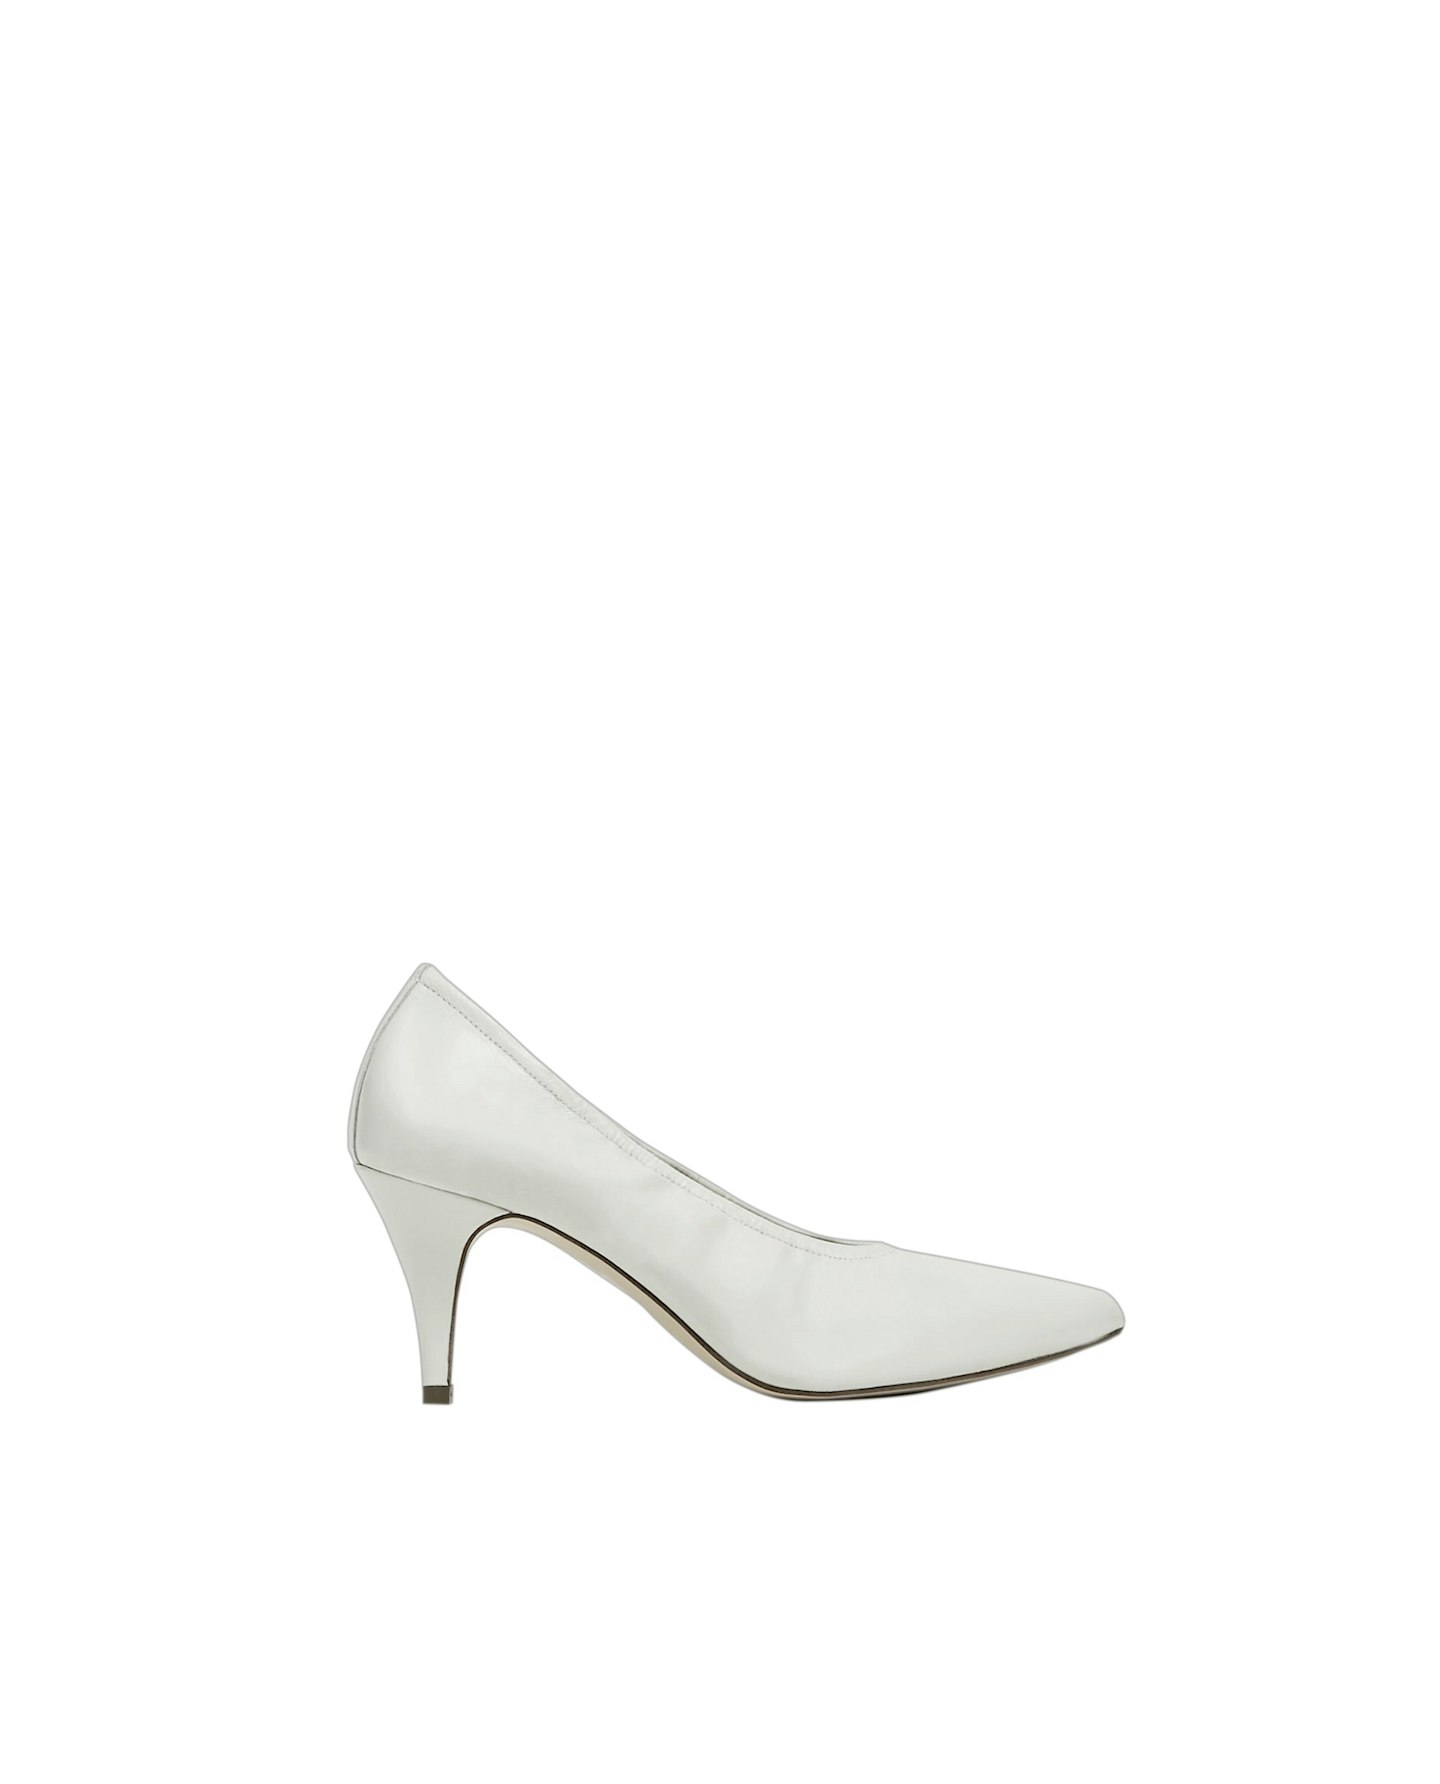 White leather mid-heel shoes